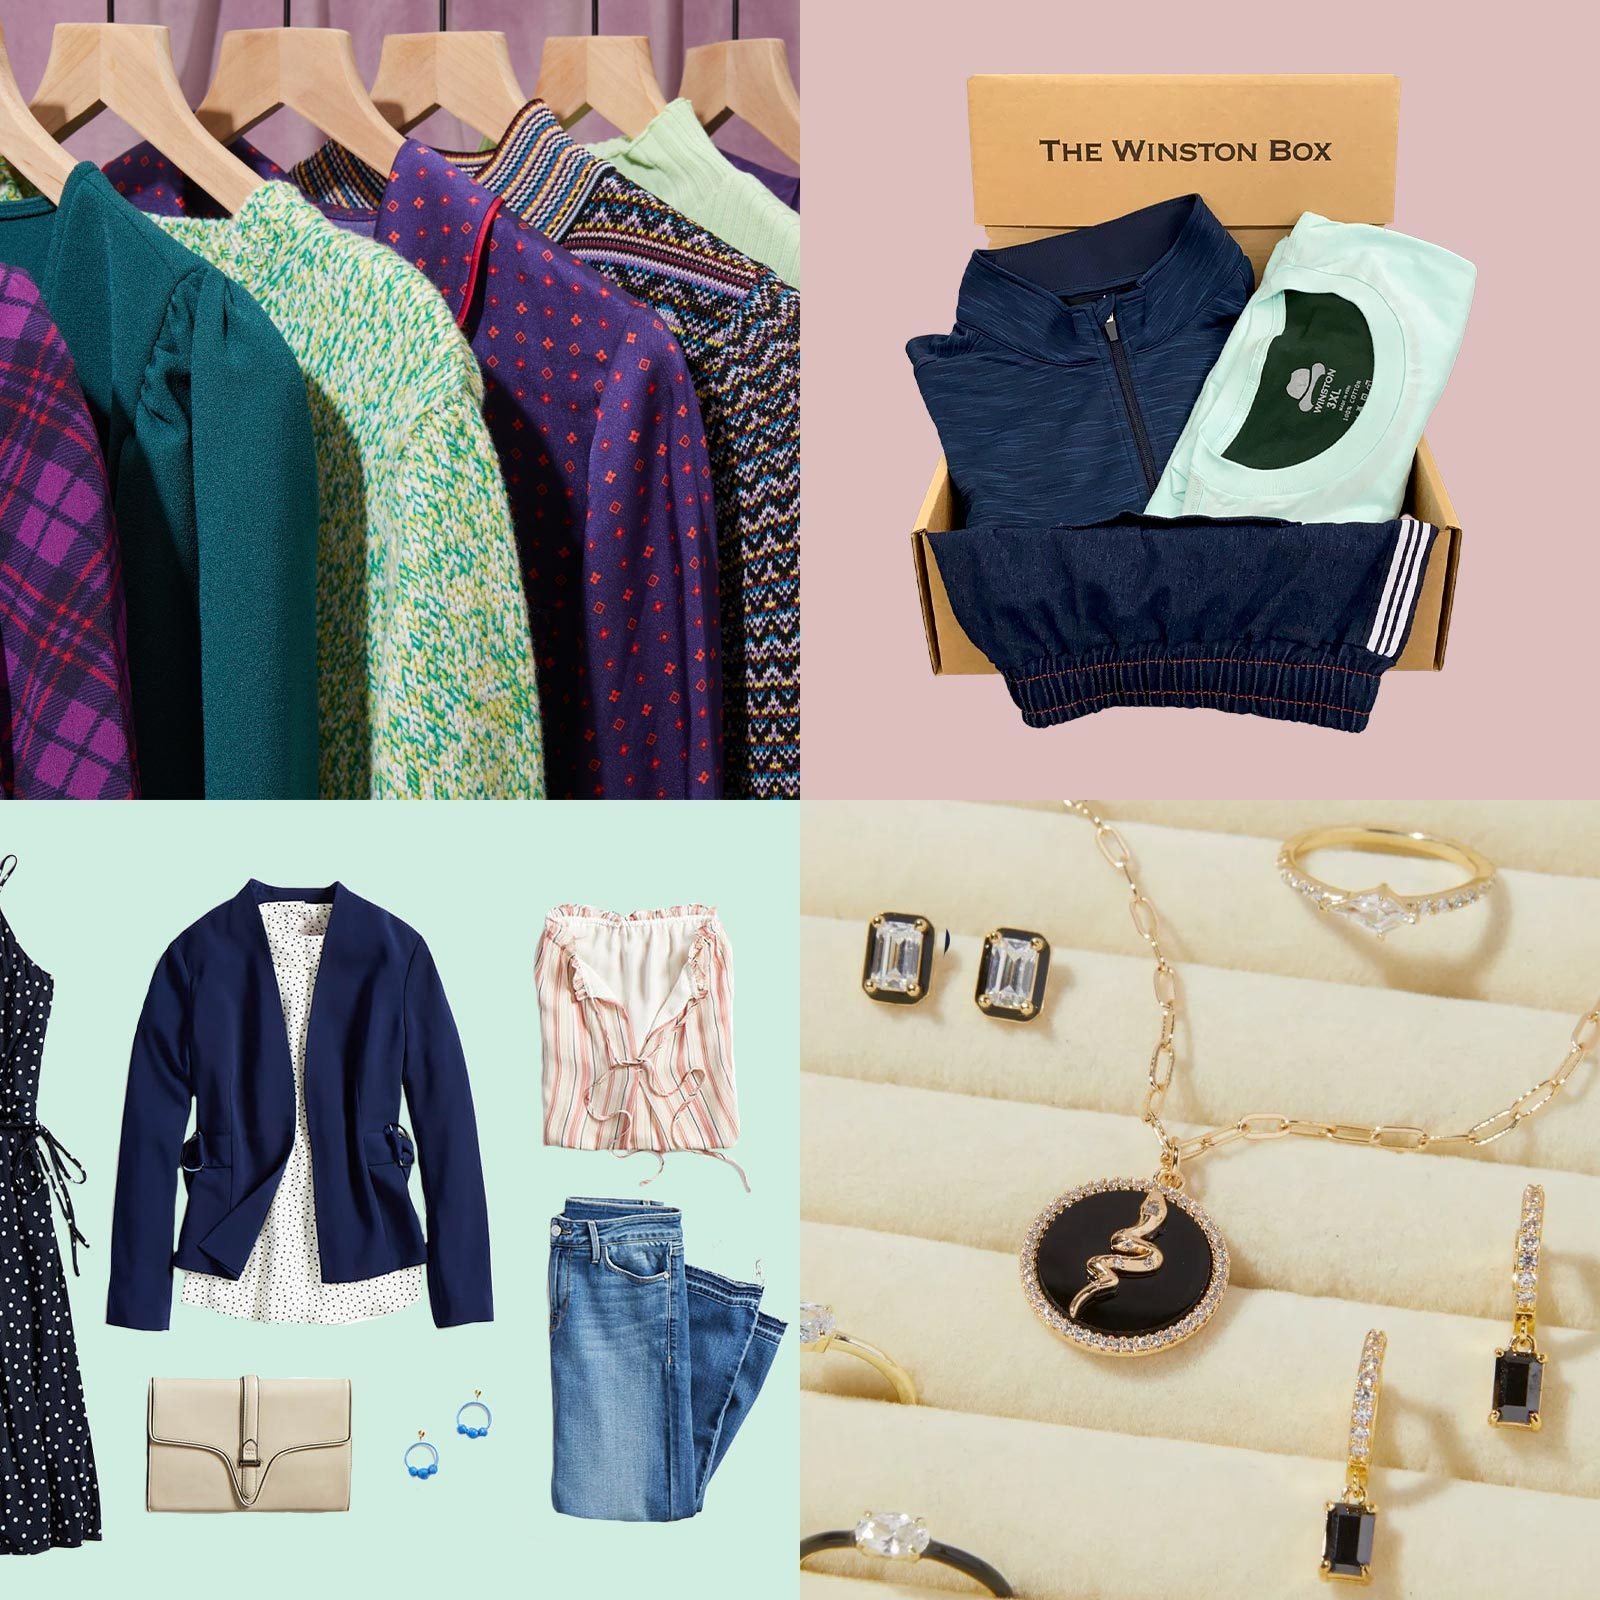 Monthly Stylebox  An Unlimited Wardrobe - Cappuccinos & Consignment